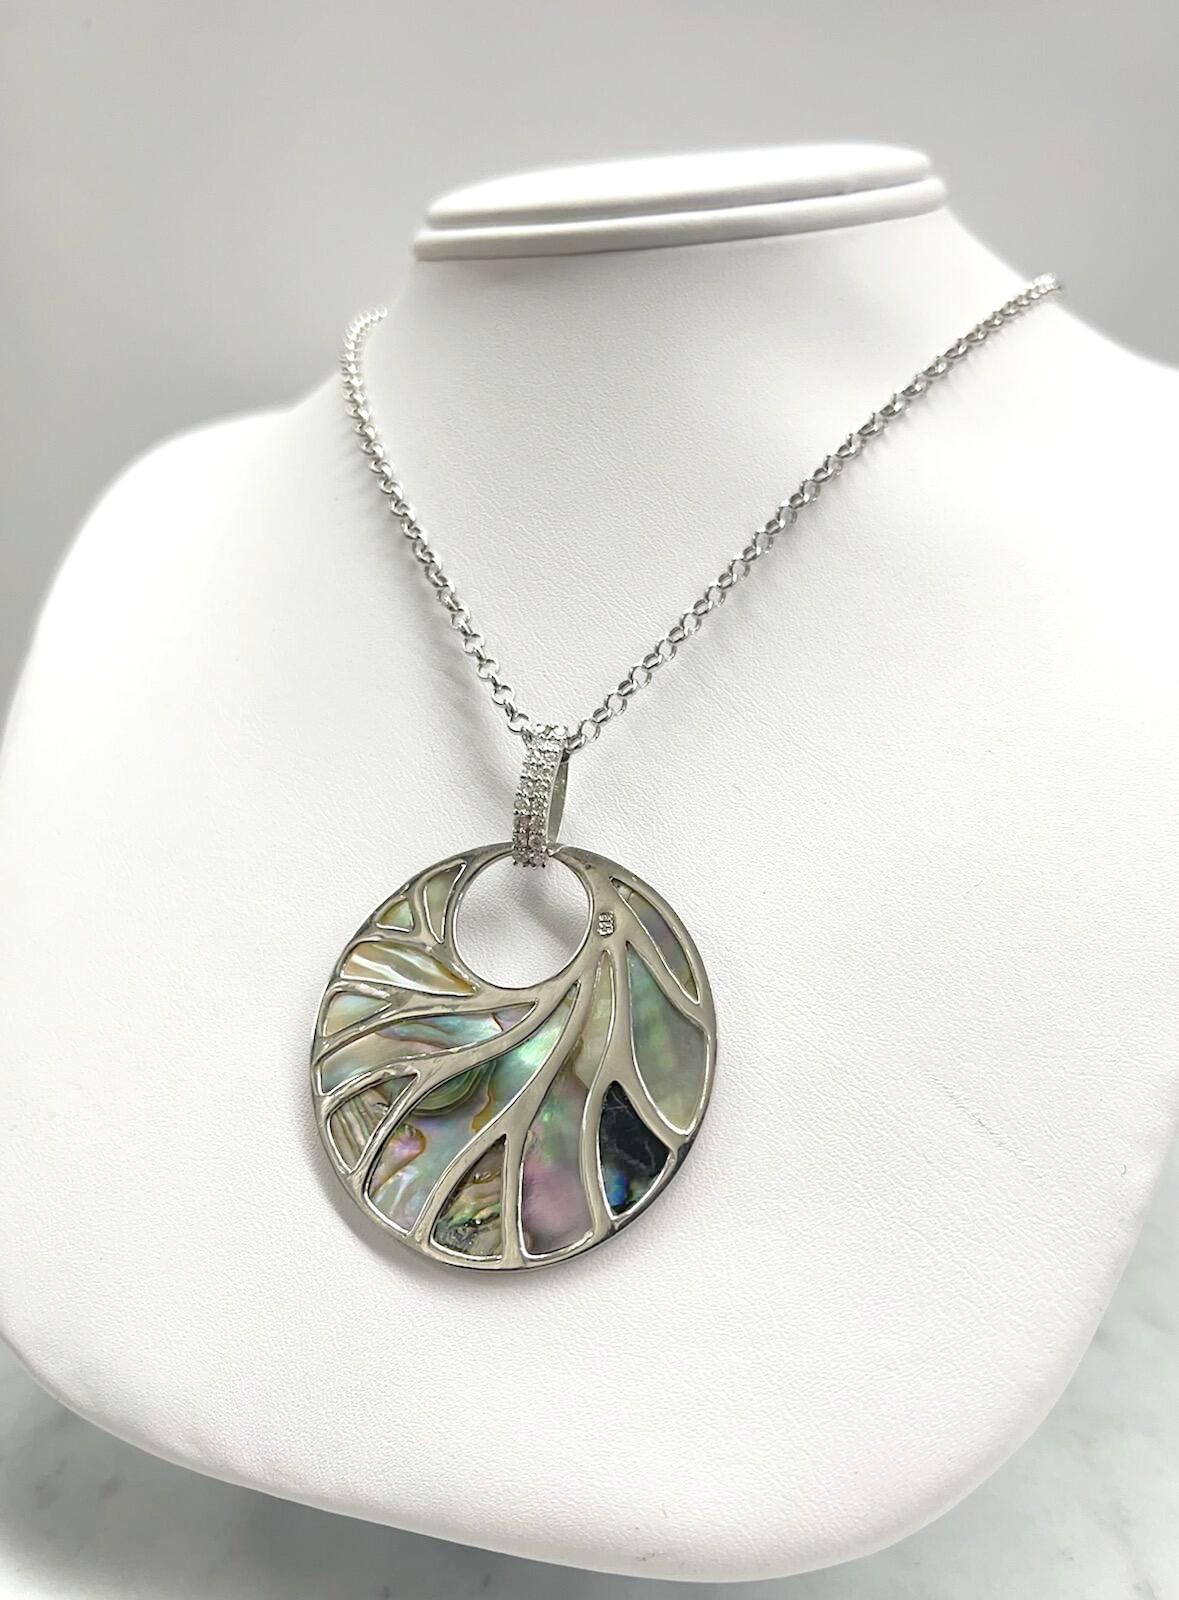 Make a statement with this beautiful abalone pearl pendant with a diamond encrusted hook and a 30